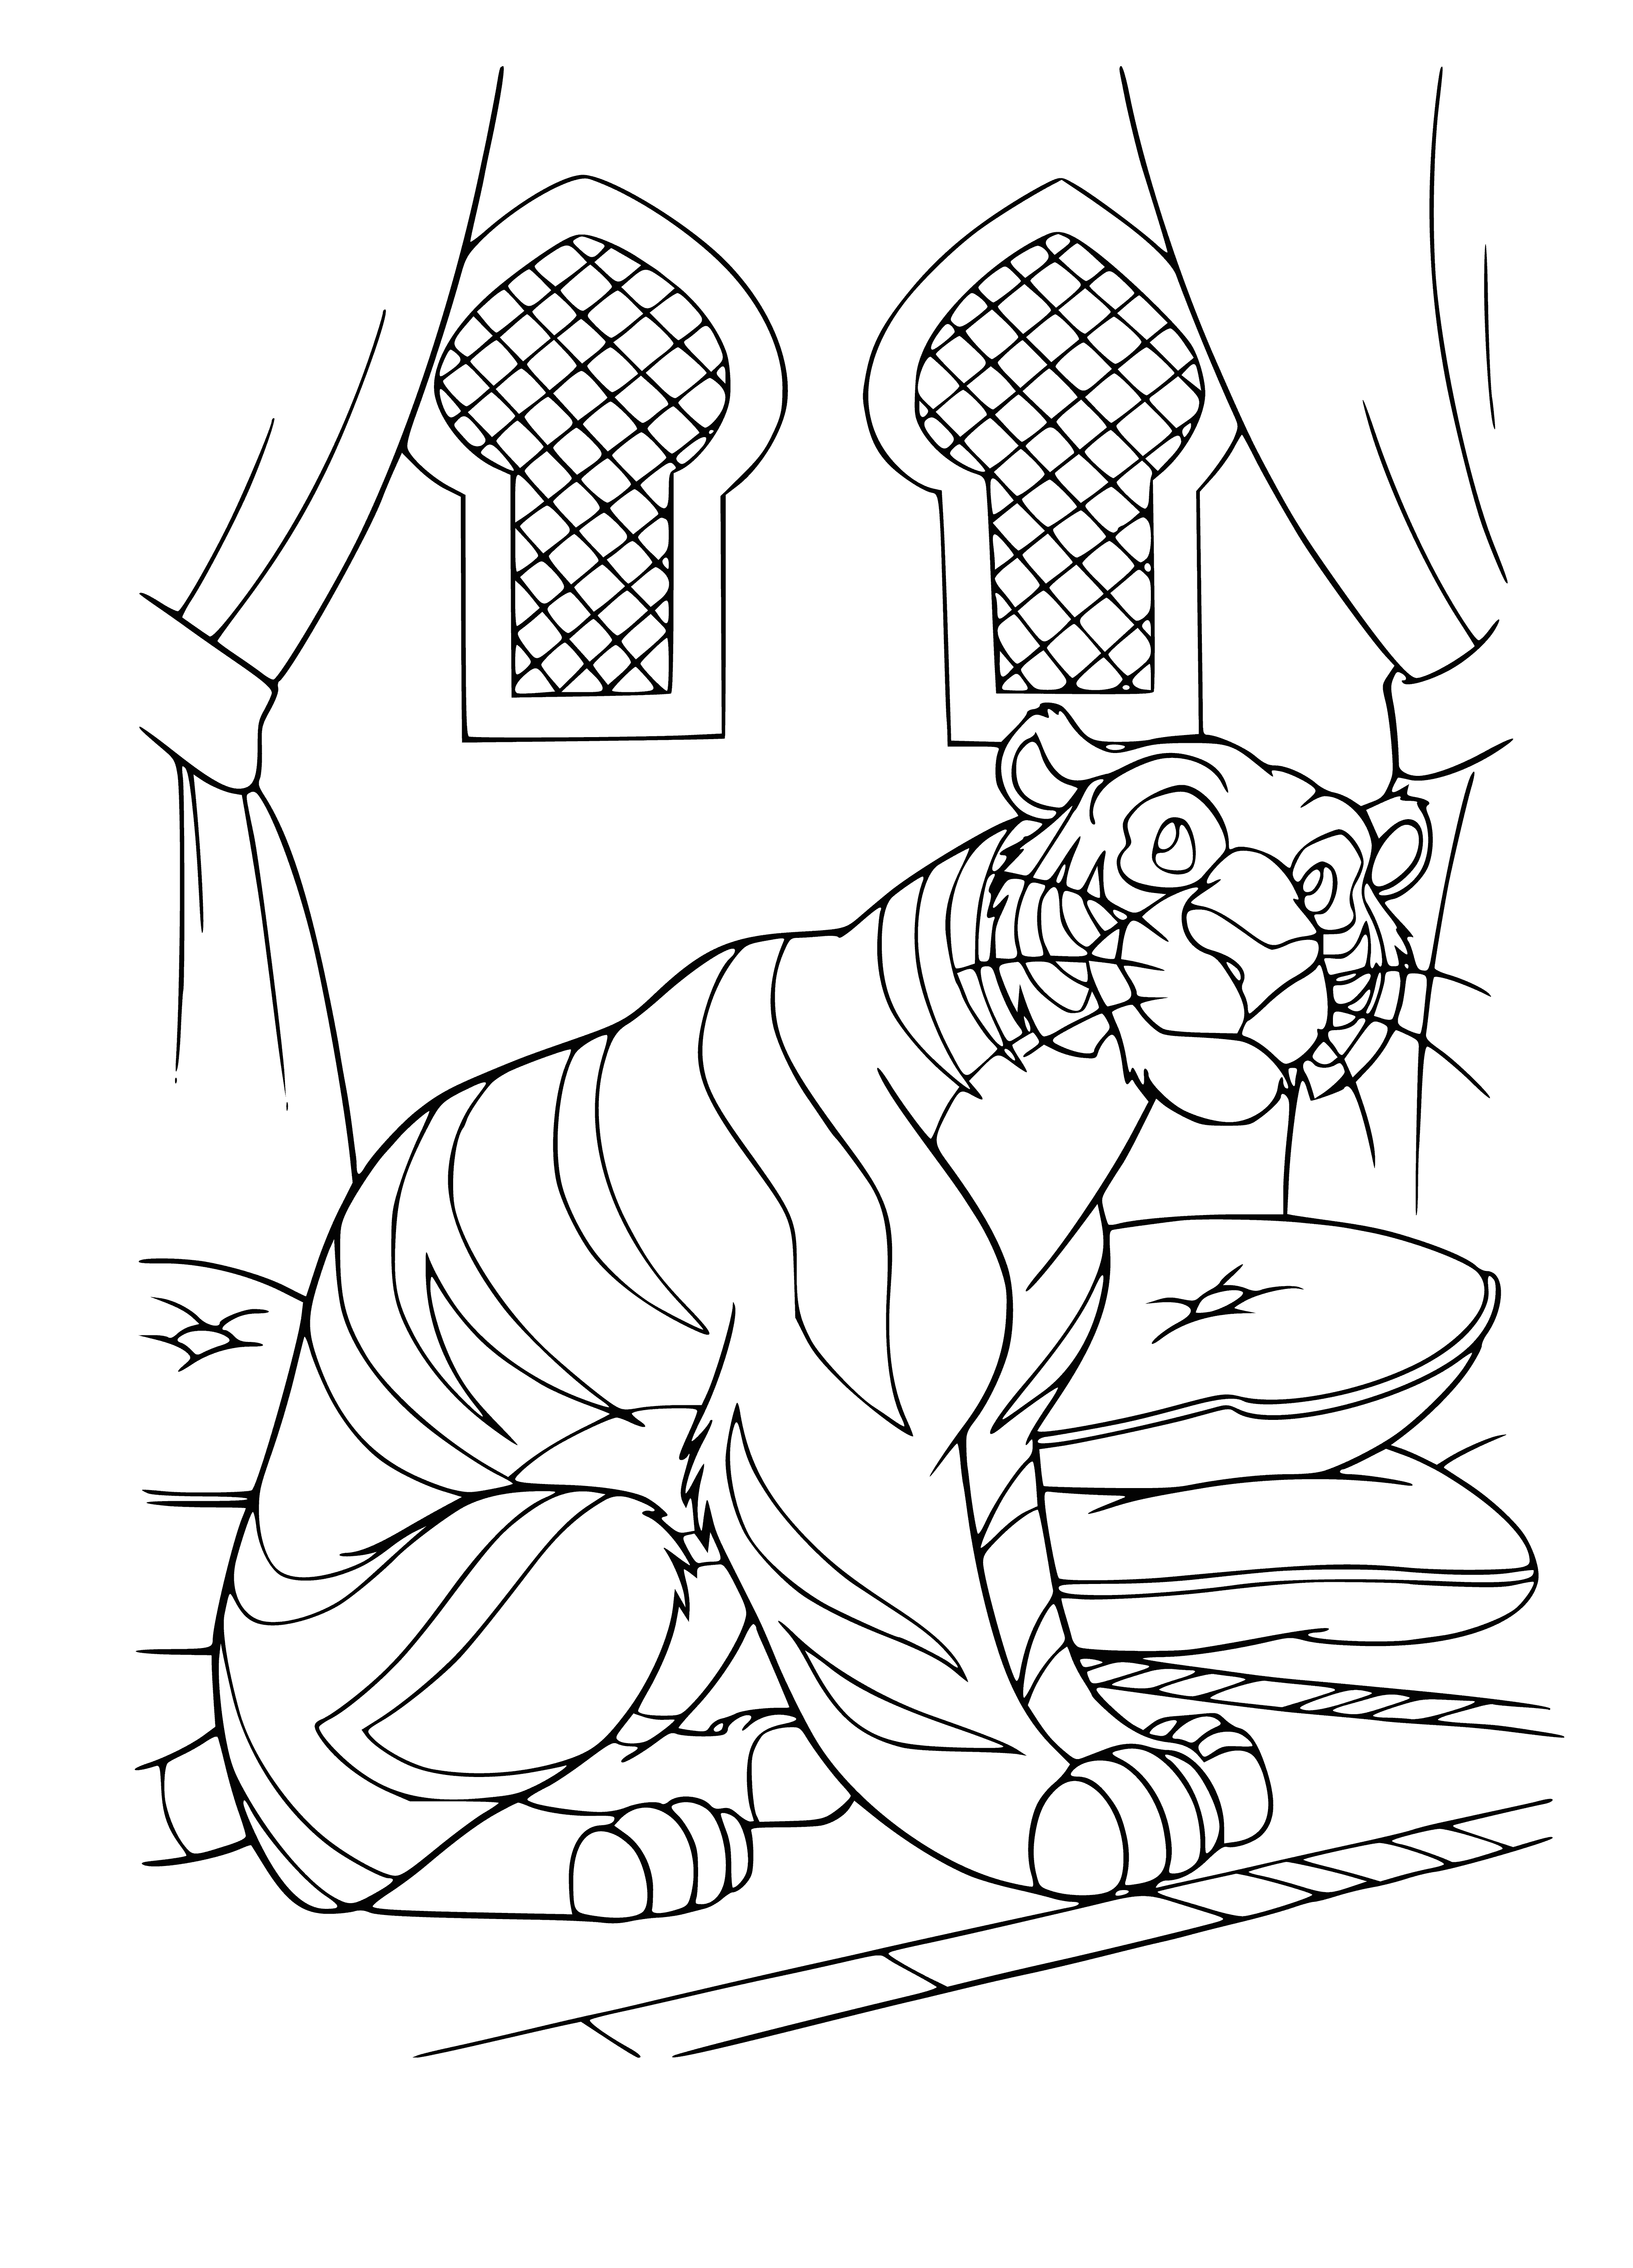 coloring page: Jasmine stands before a tiger in purple outfit & gold jewellery. The tiger stares calmly at her.